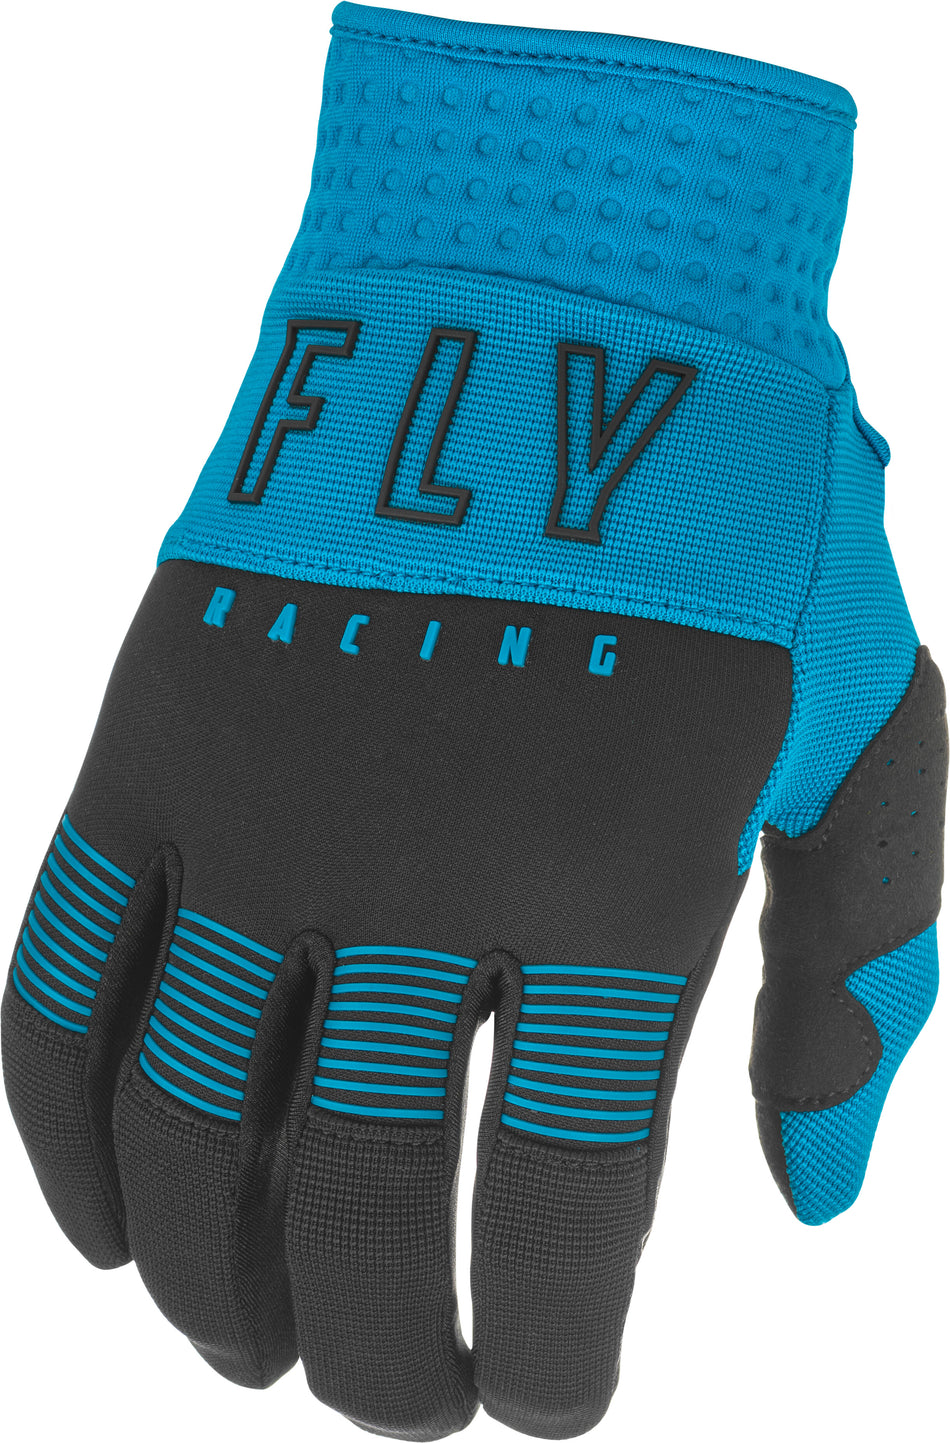 FLY RACING Youth F-16 Gloves Blue/Black Sz 03 374-91103